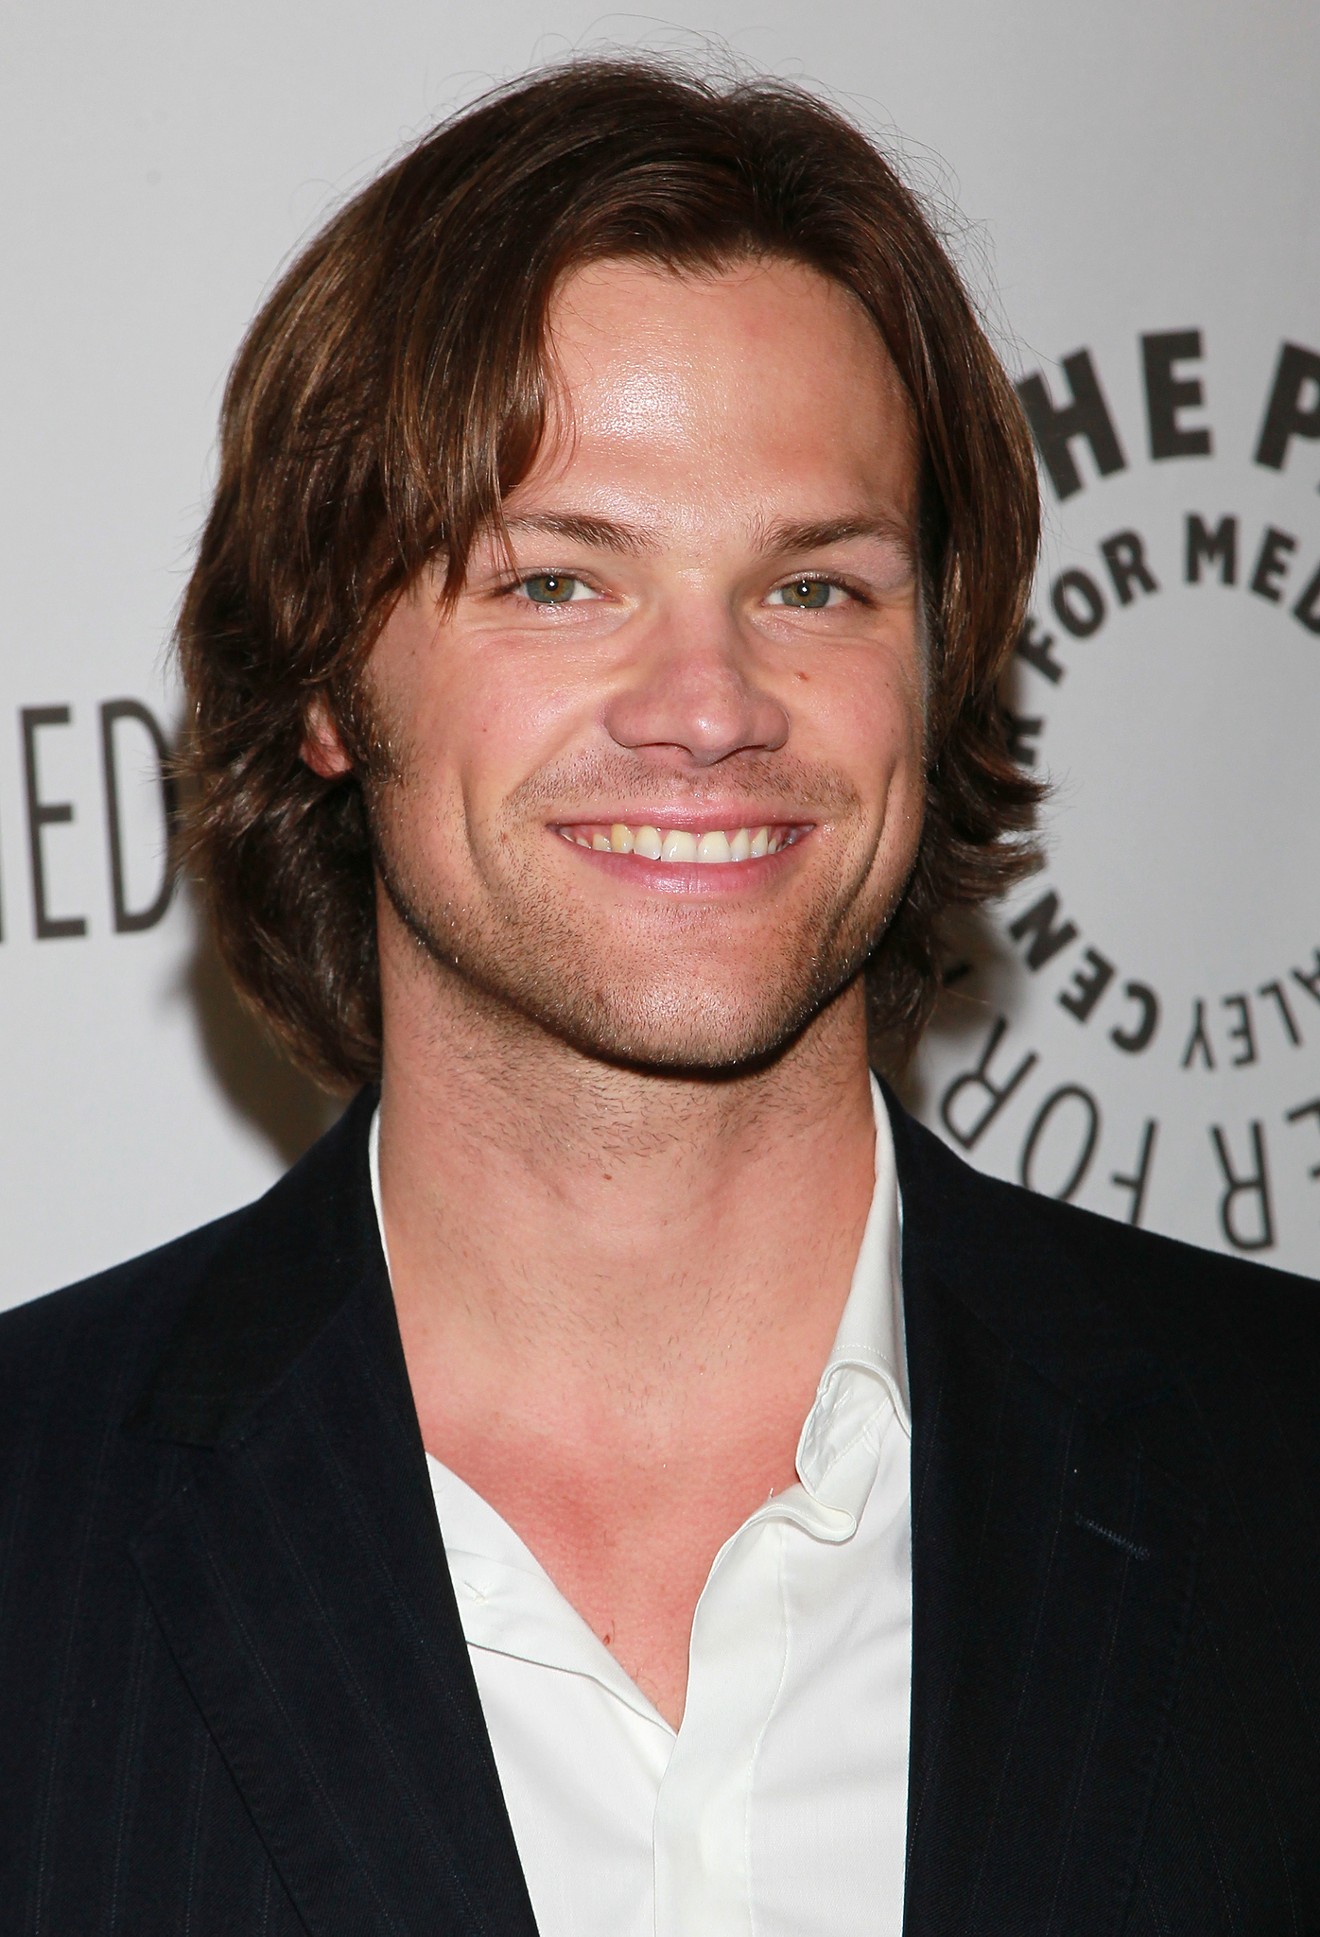 Supernatural and Gilmore Girls star Jared Padalecki will make his way to Dallas this week for the world's largest high school speech and debate competition.